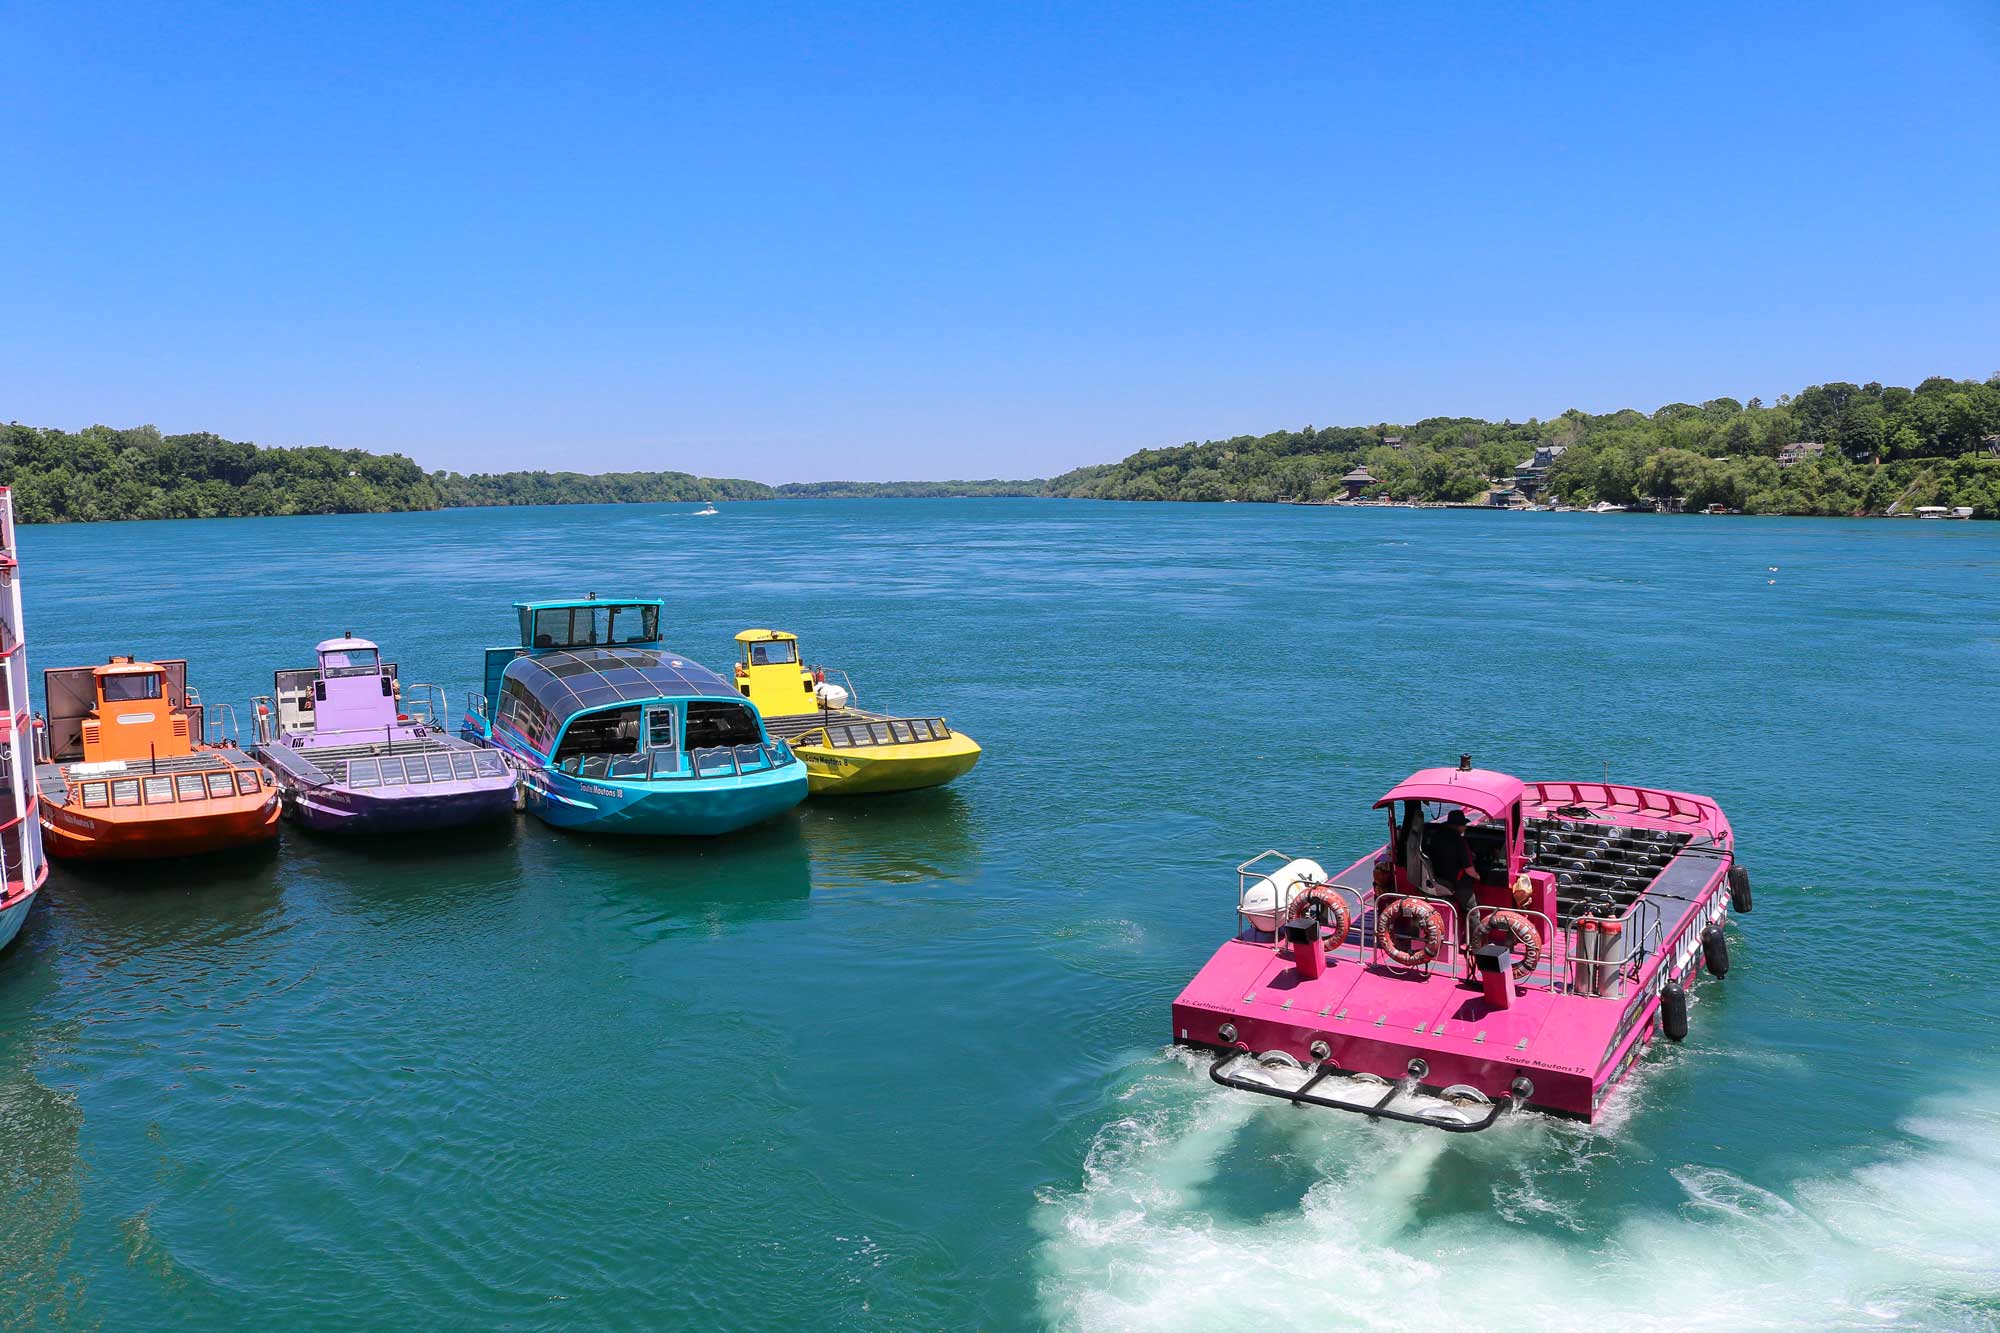 whirlpool jet boat tours queenston reviews